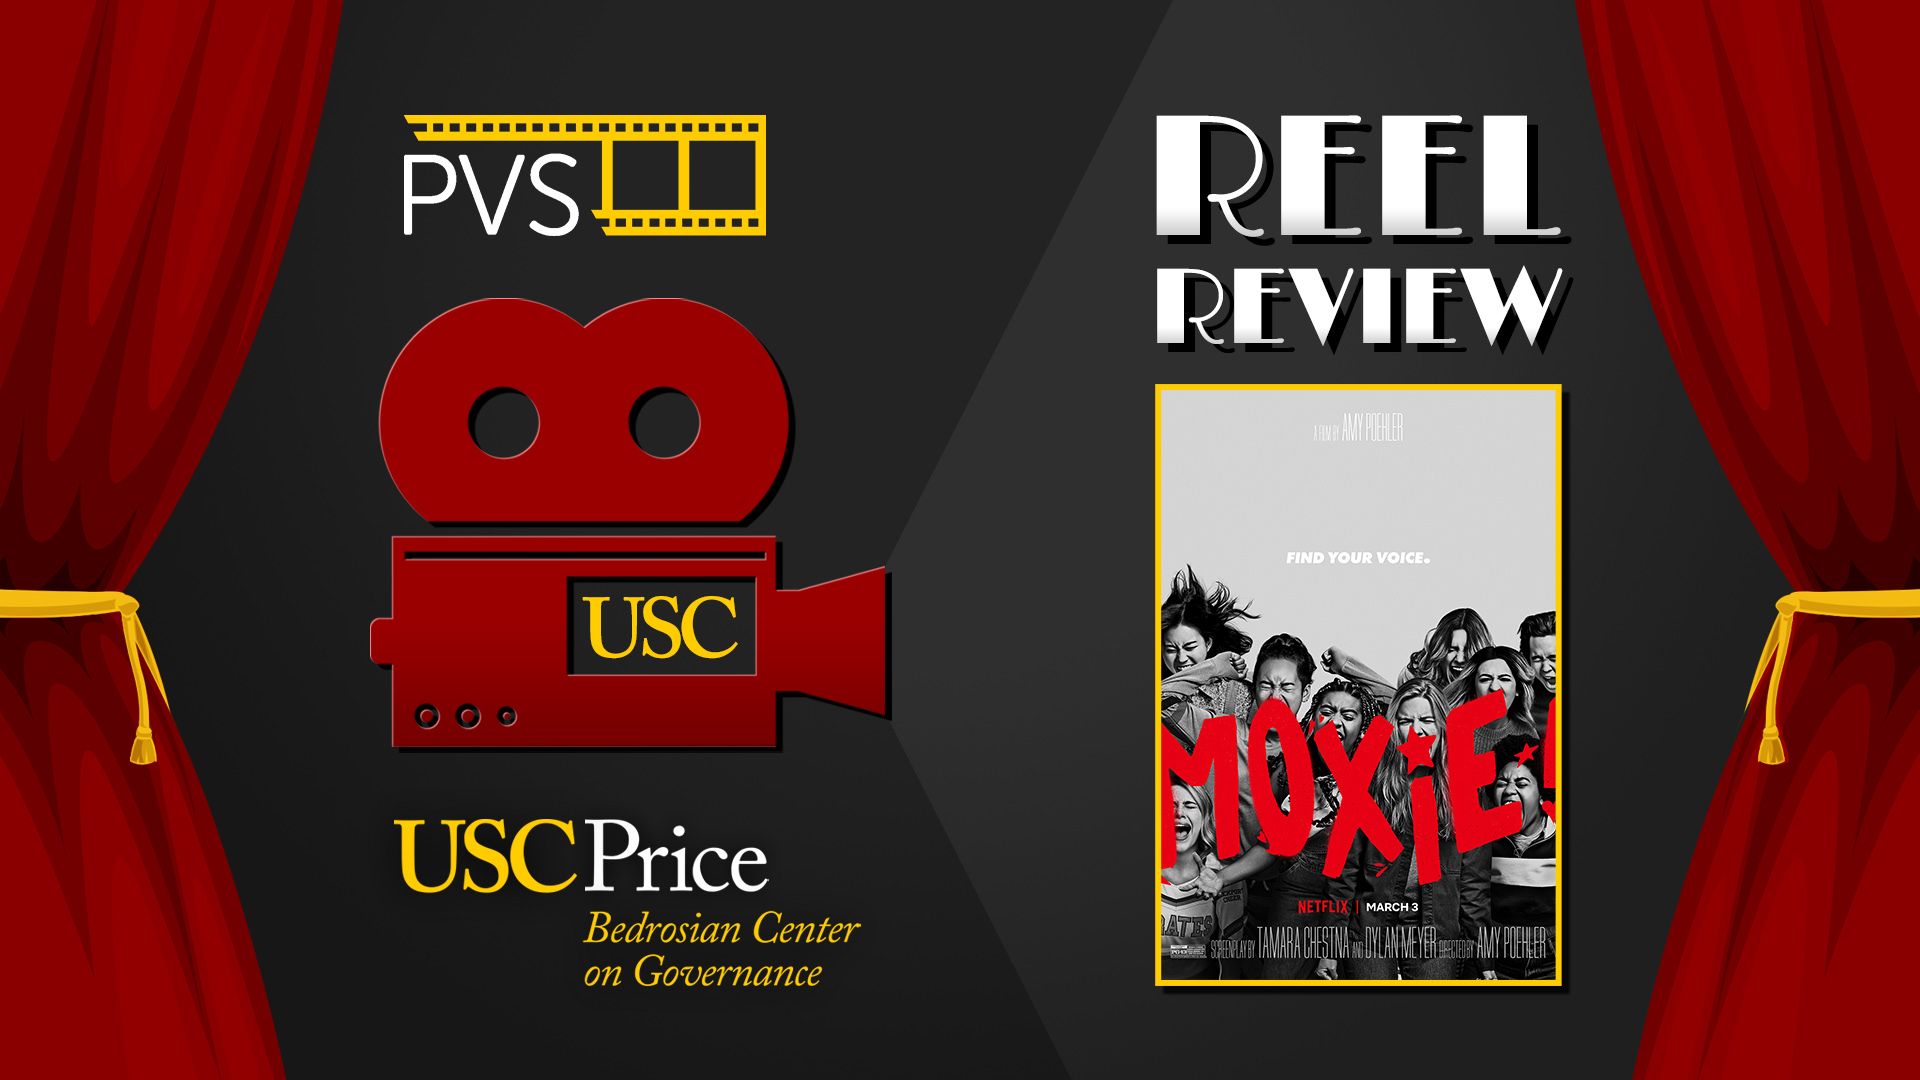 Graphic from of the Reel Review logo with the Moxie film poster image